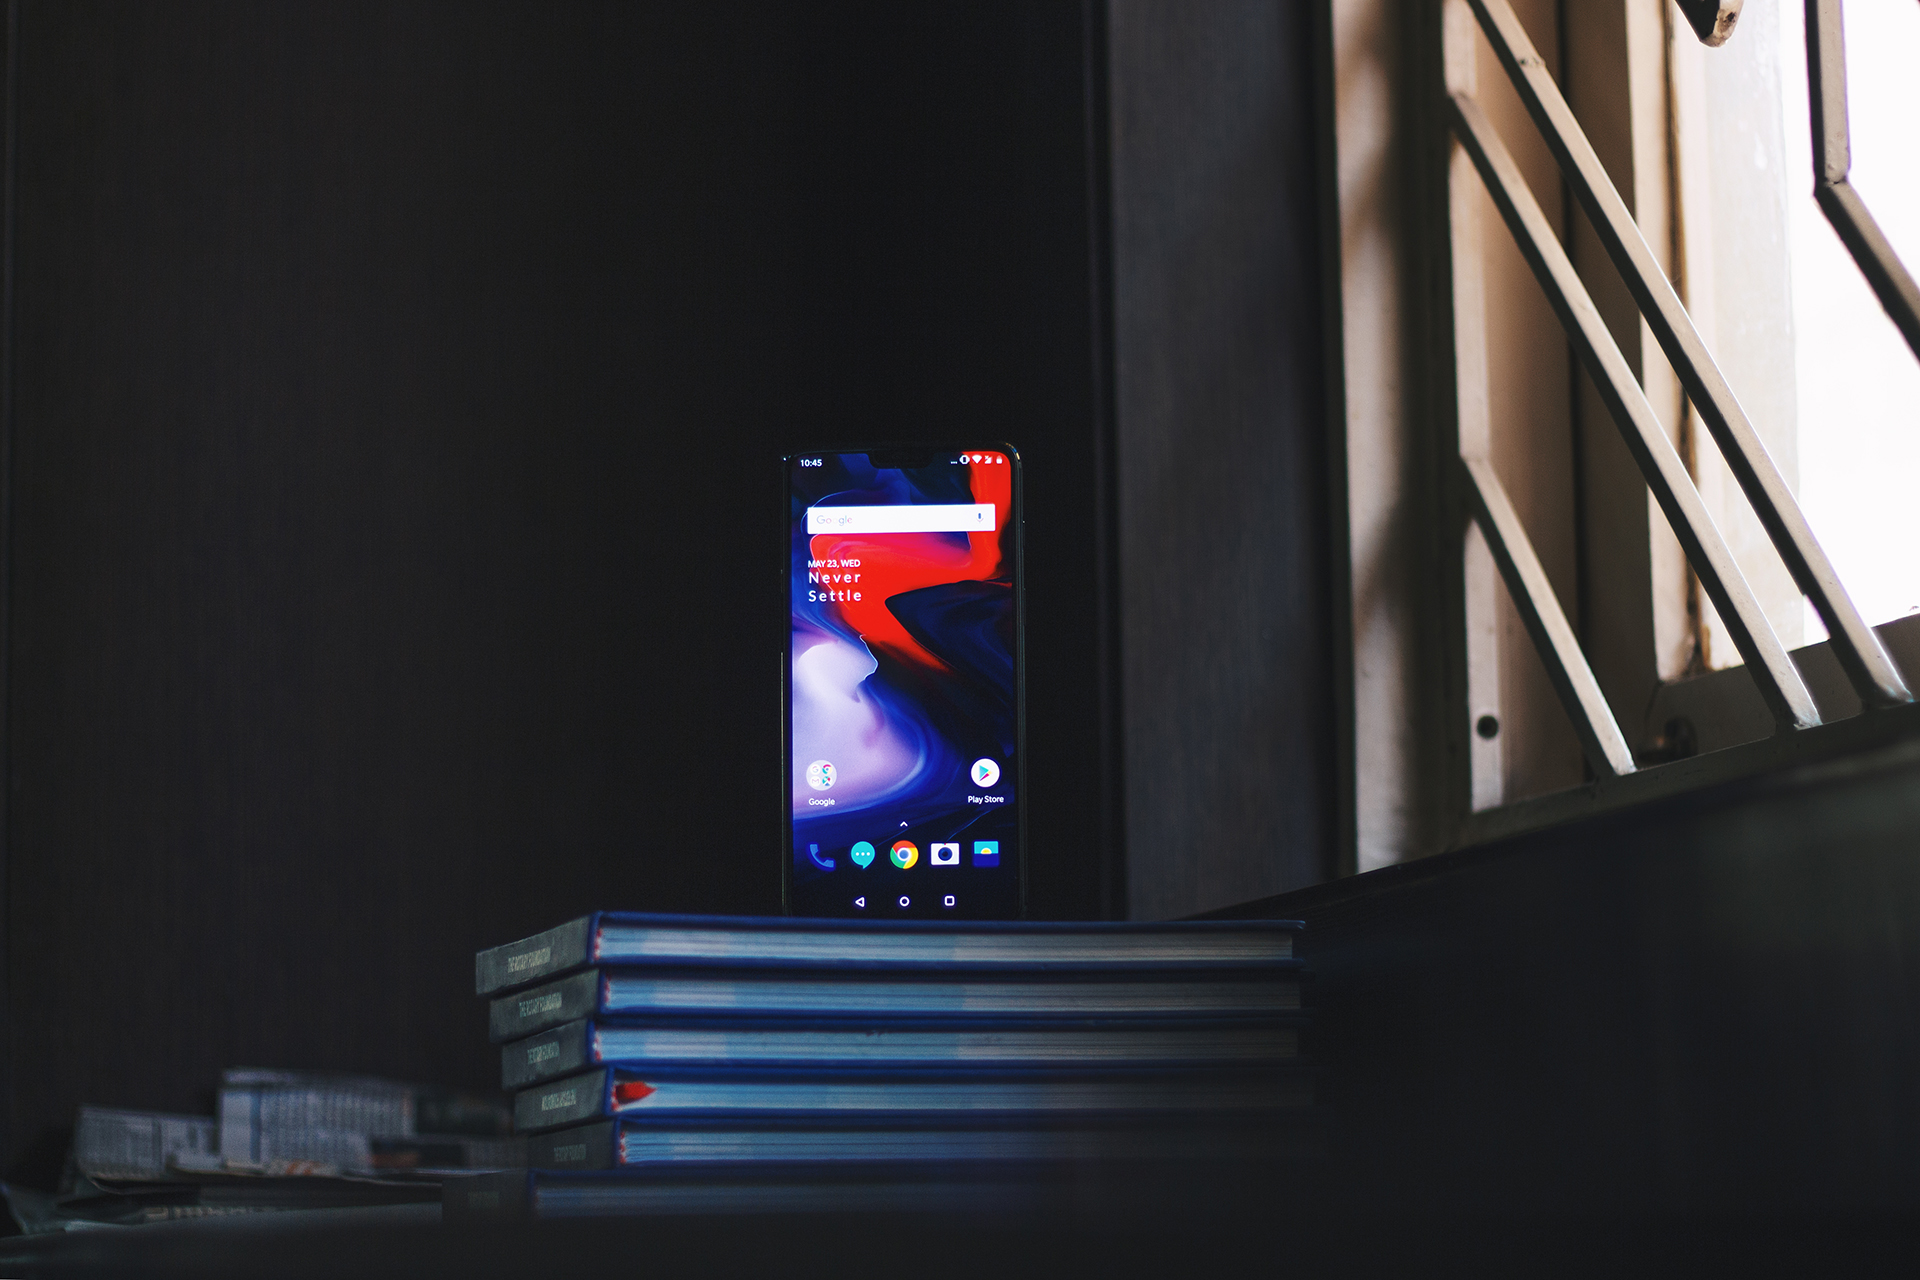 Oneplus 6 Review Design Truetech 7 – Oneplus 6 Review – The Nearly Quintessential Phone That Oneplus Made | Truetech